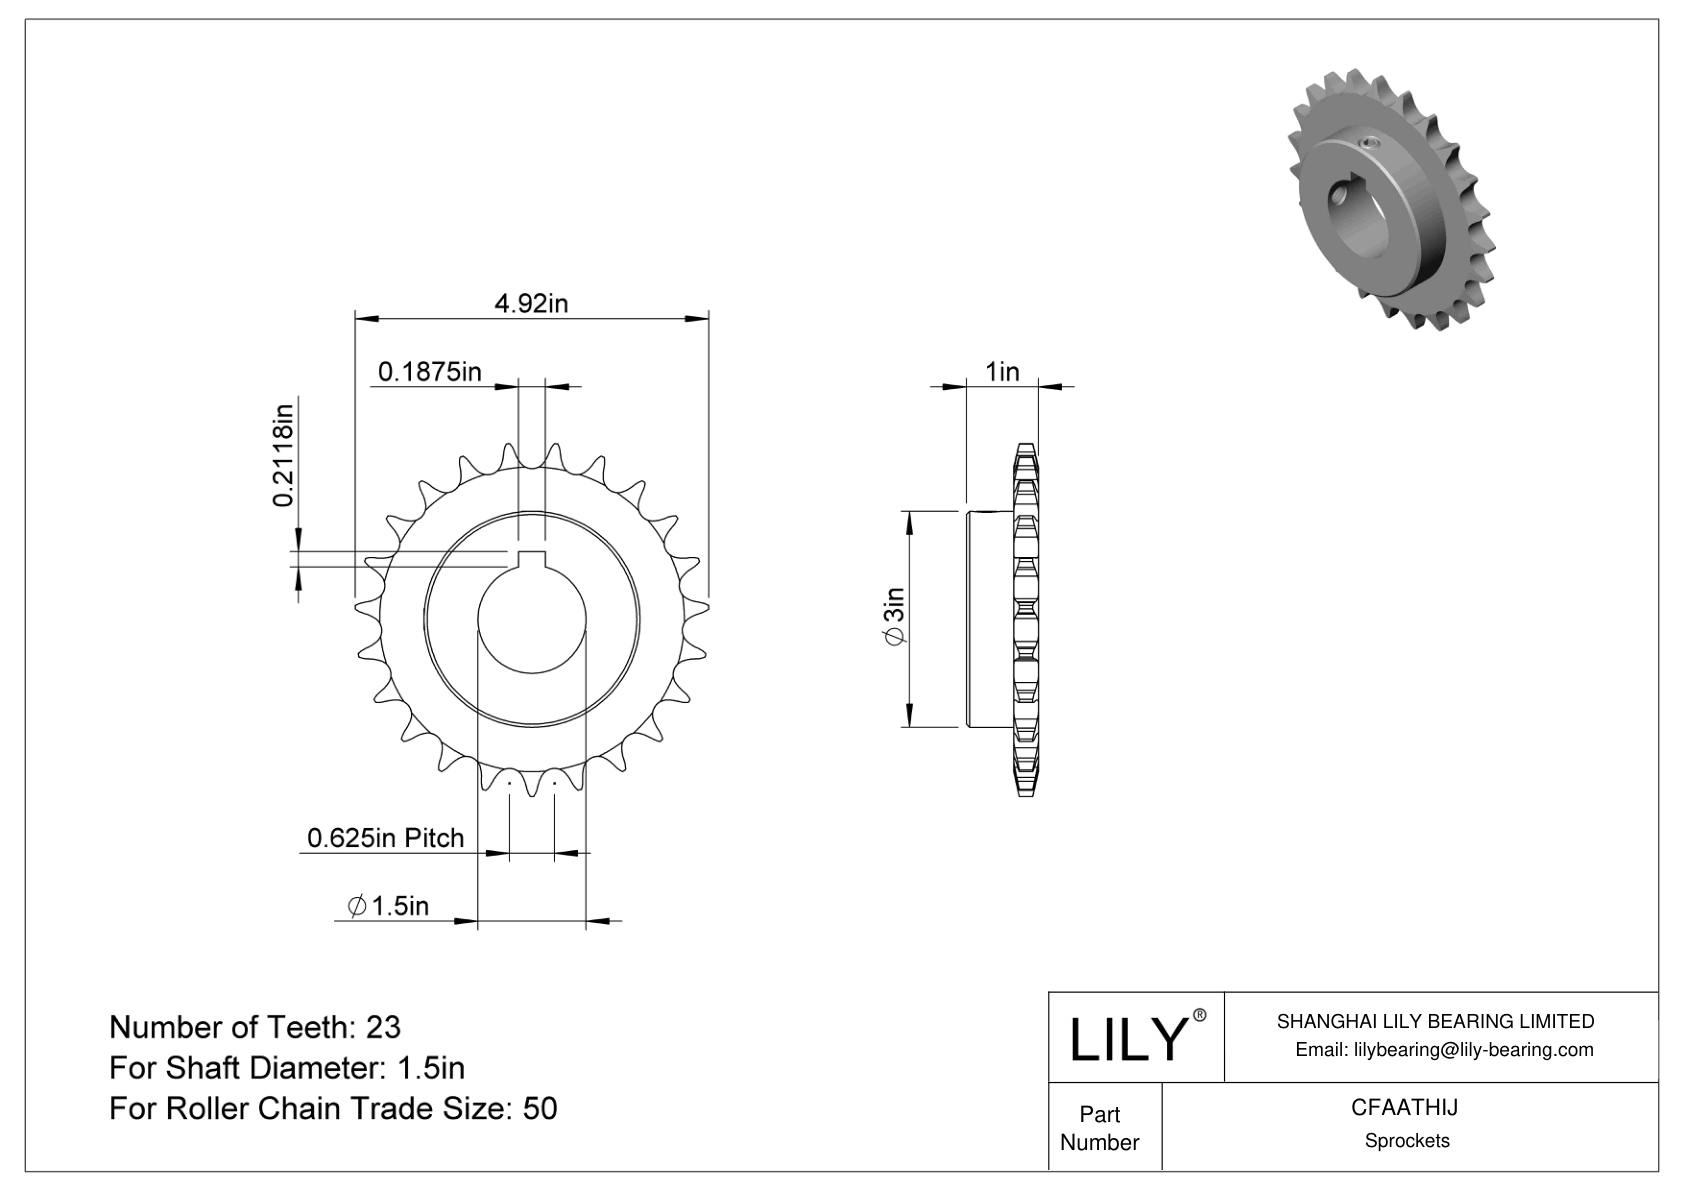 CFAATHIJ Wear-Resistant Sprockets for ANSI Roller Chain cad drawing